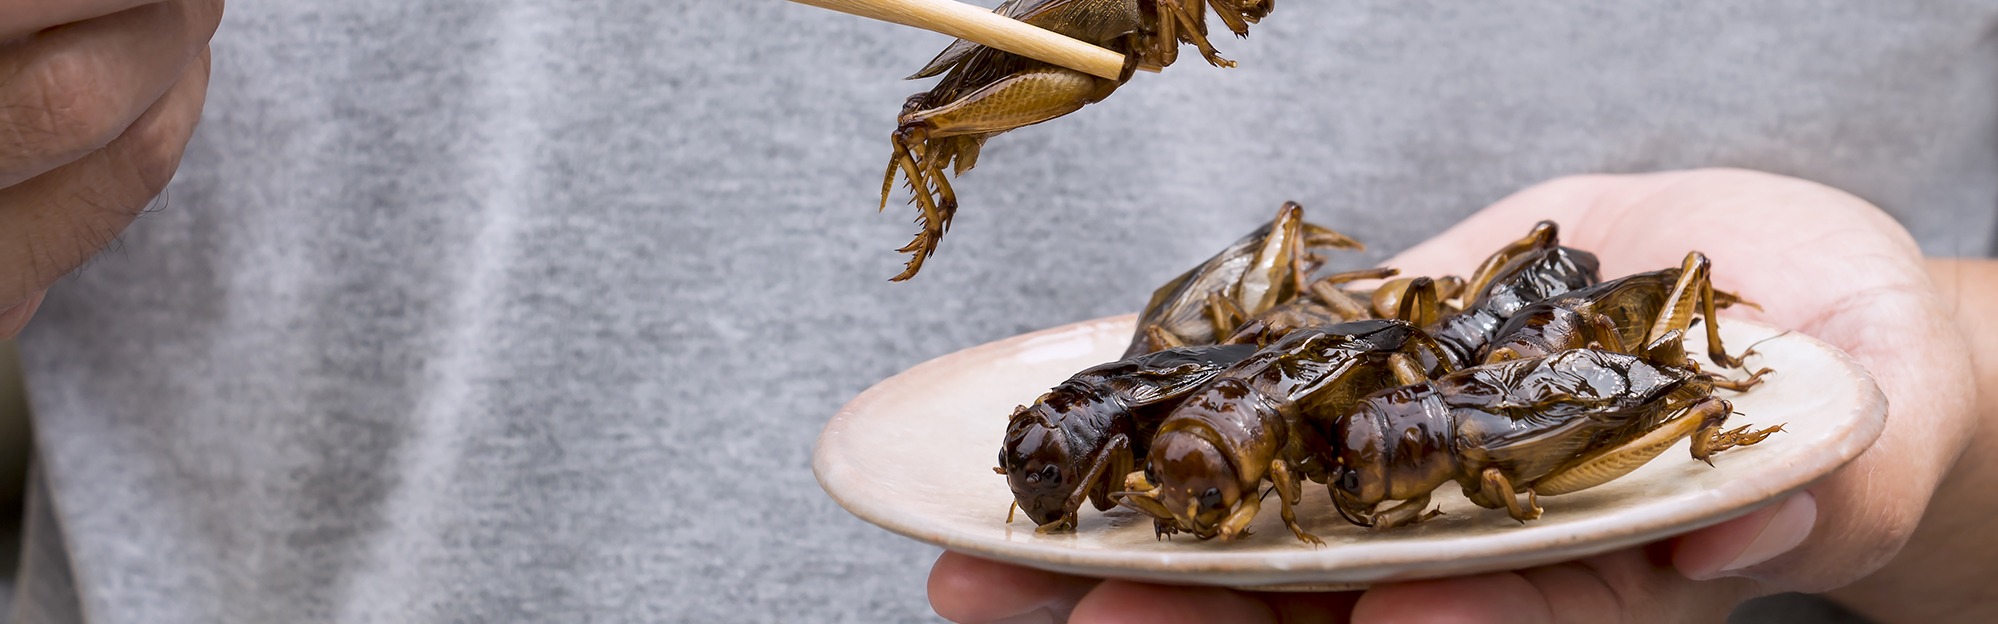 Insects such as crickets are a good source of protein.